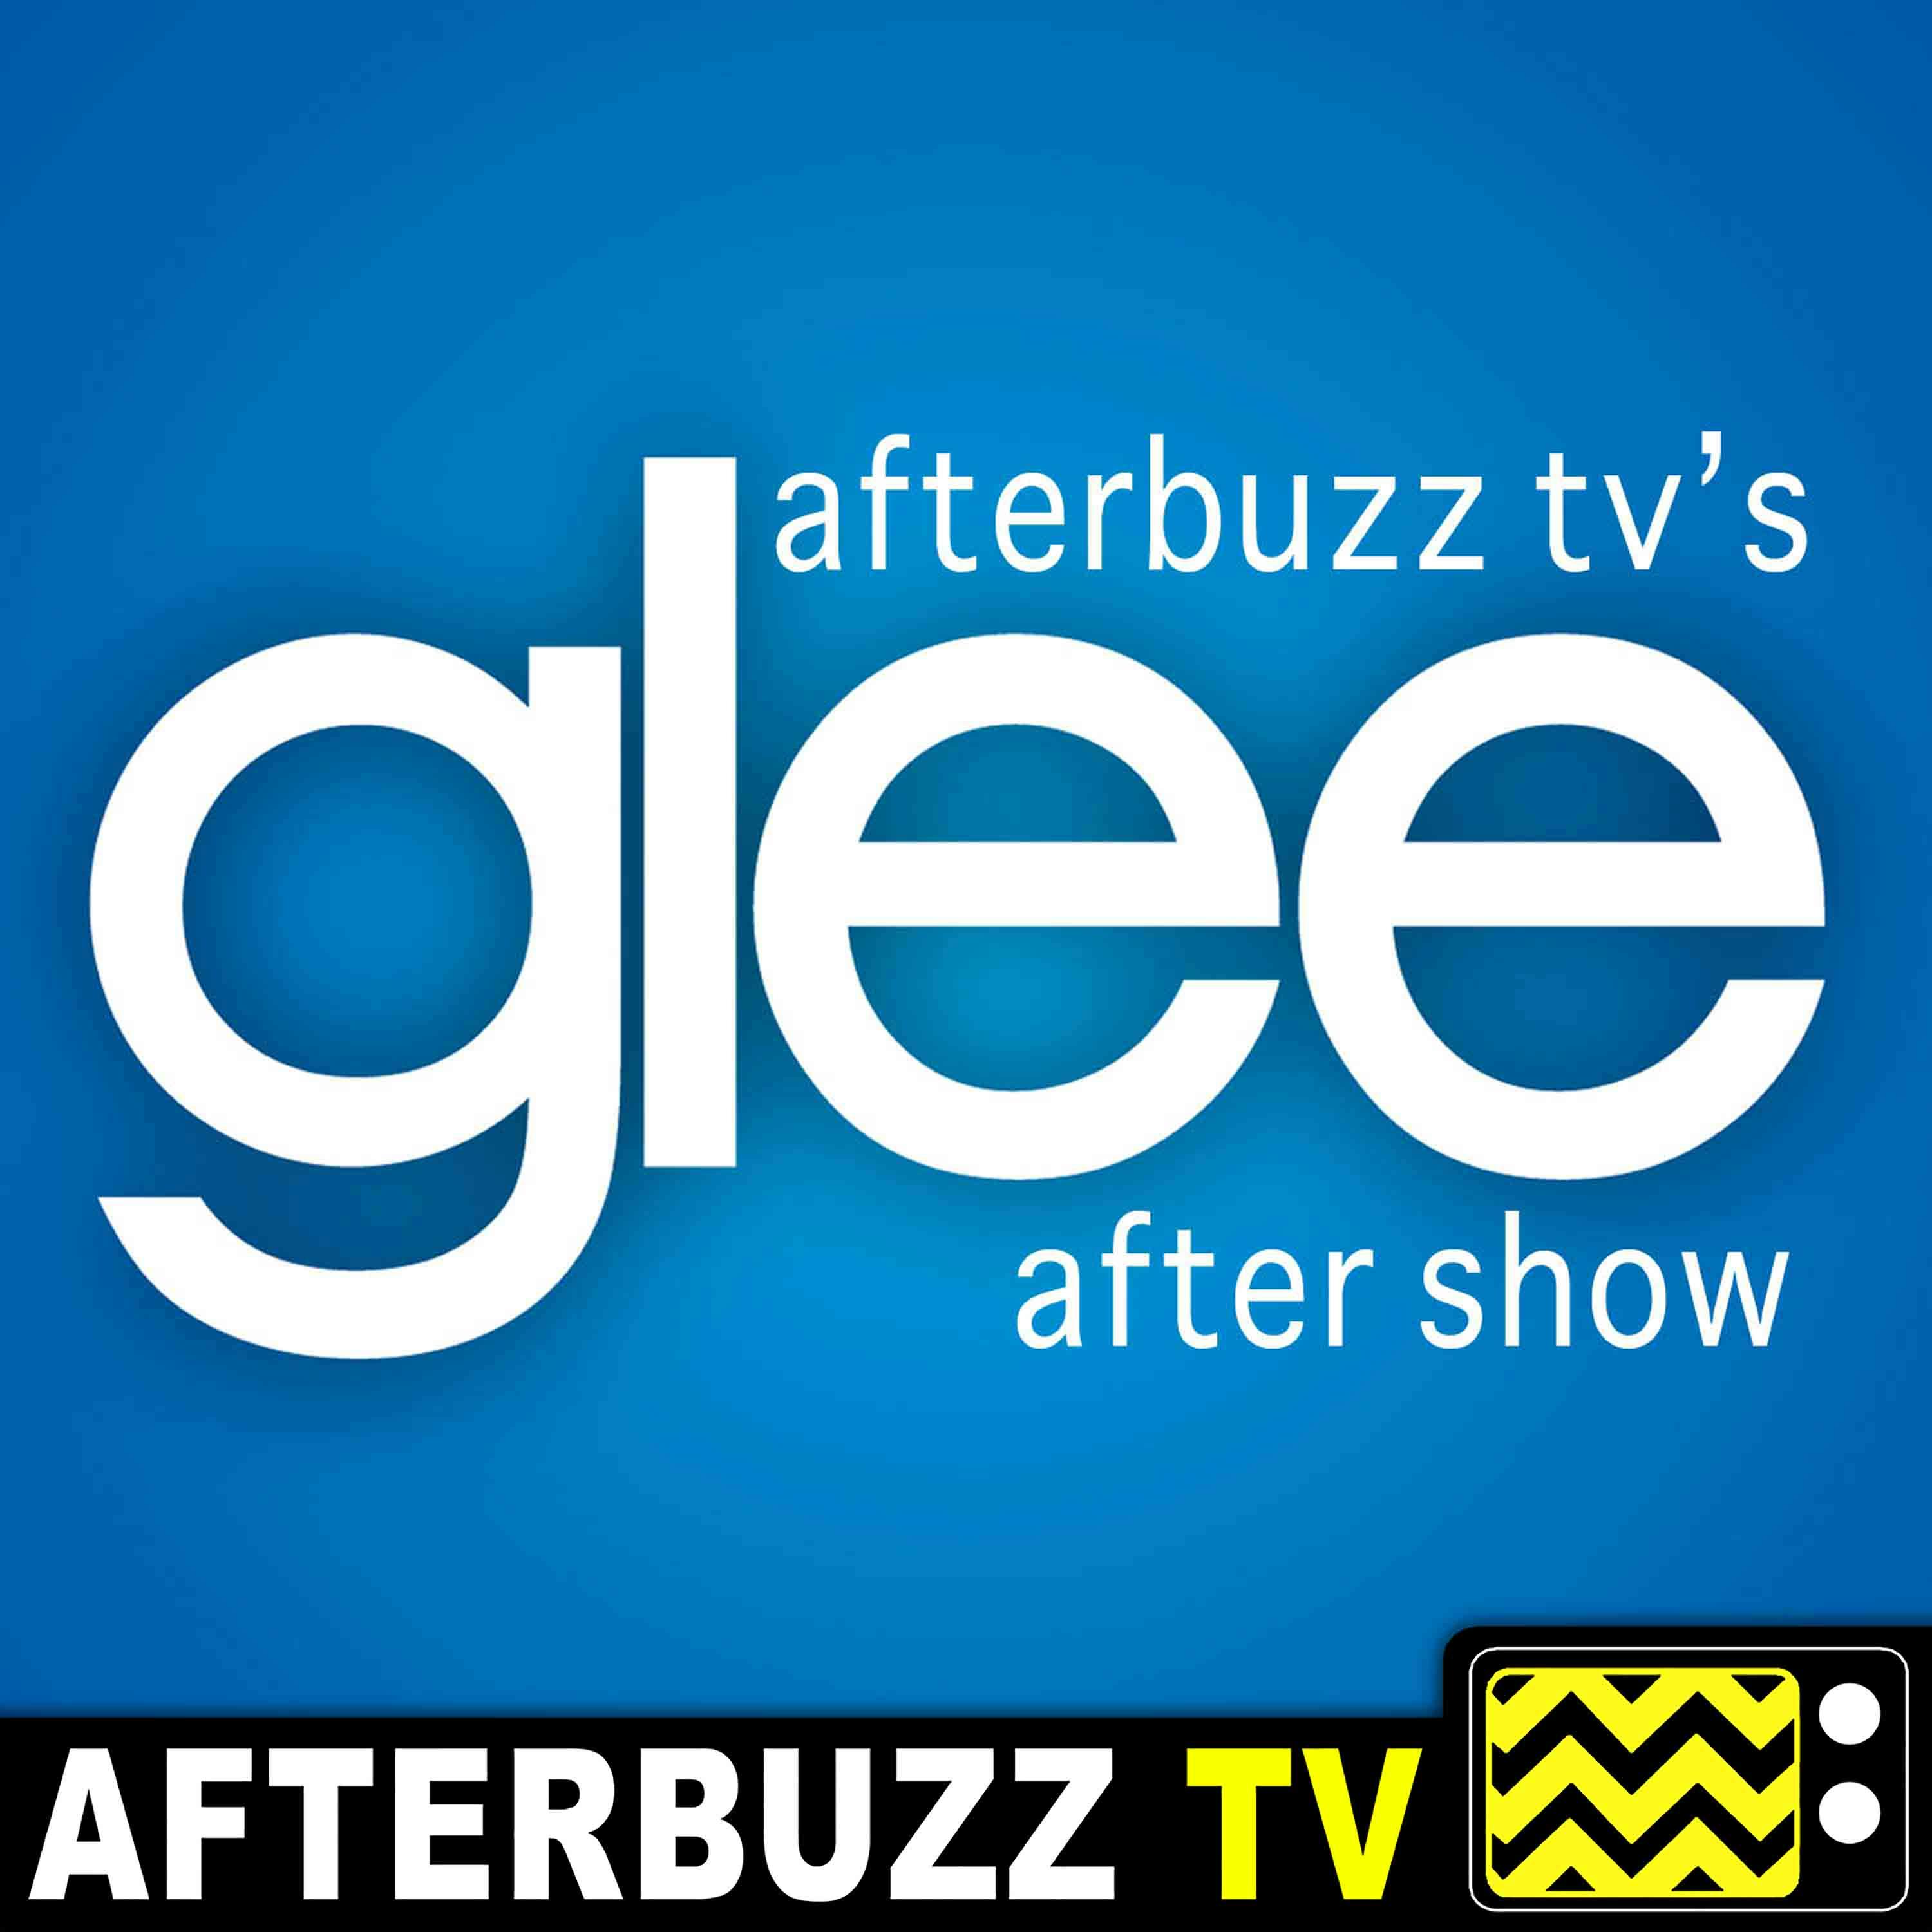 Glee S:5 | Old Dog New Tricks E:19 | AfterBuzz TV AfterShow